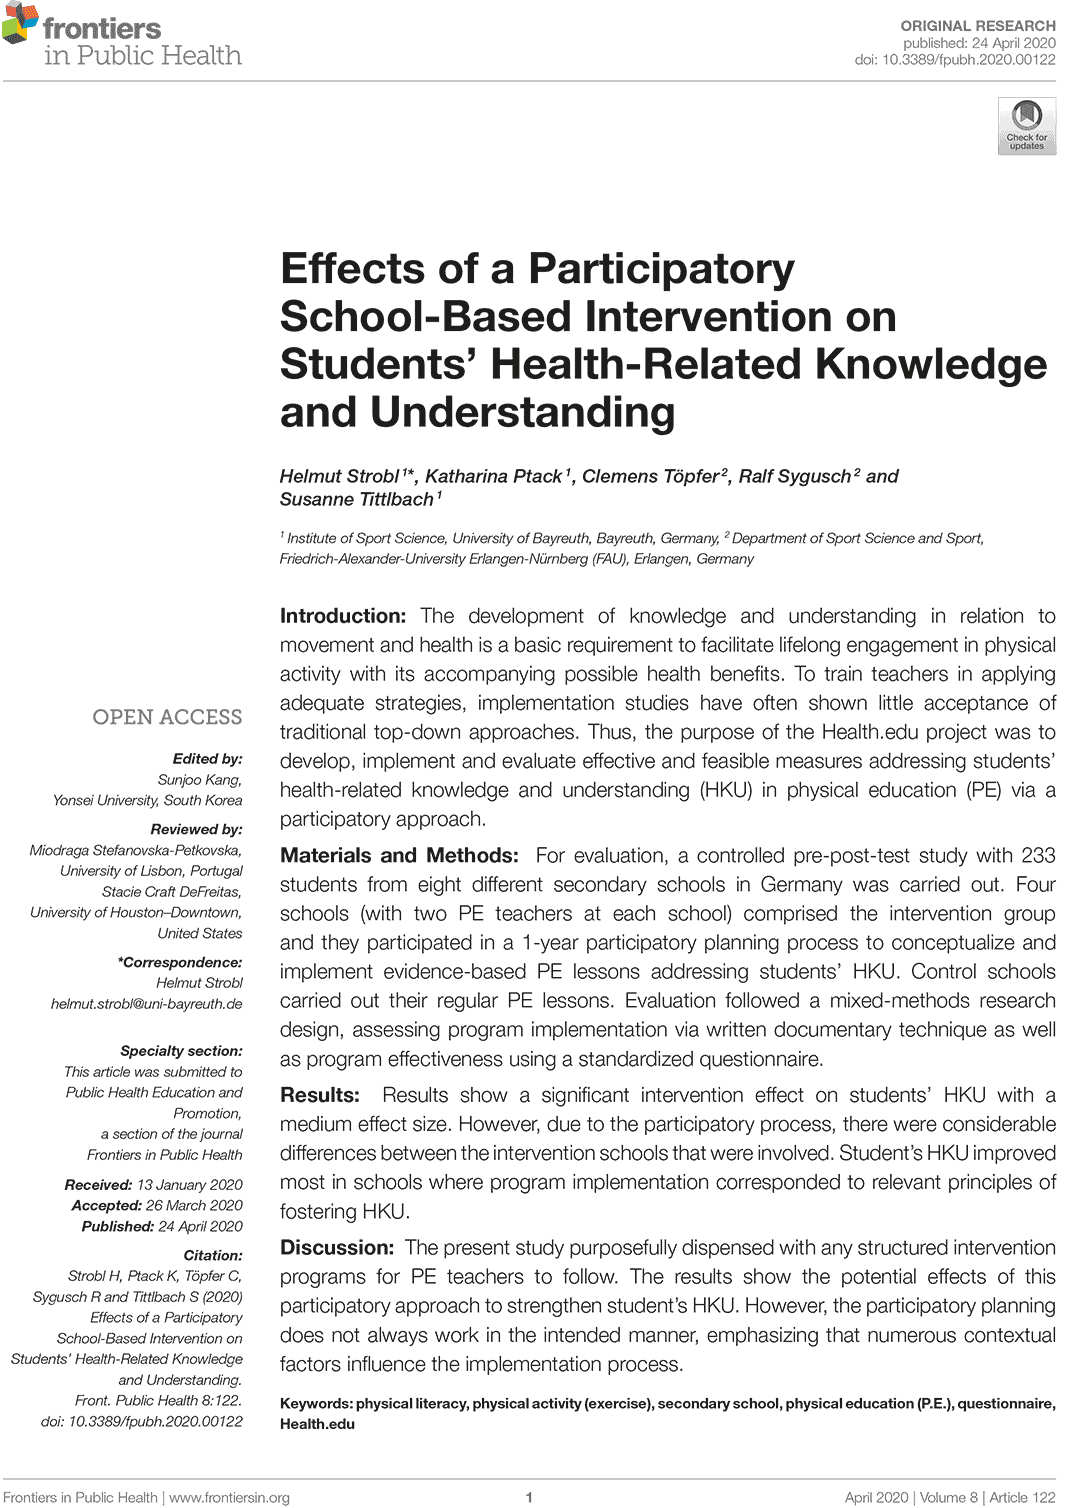 Effects of a Participatory School-Based Intervention on Students’ Health-Related Knowledge and Understanding